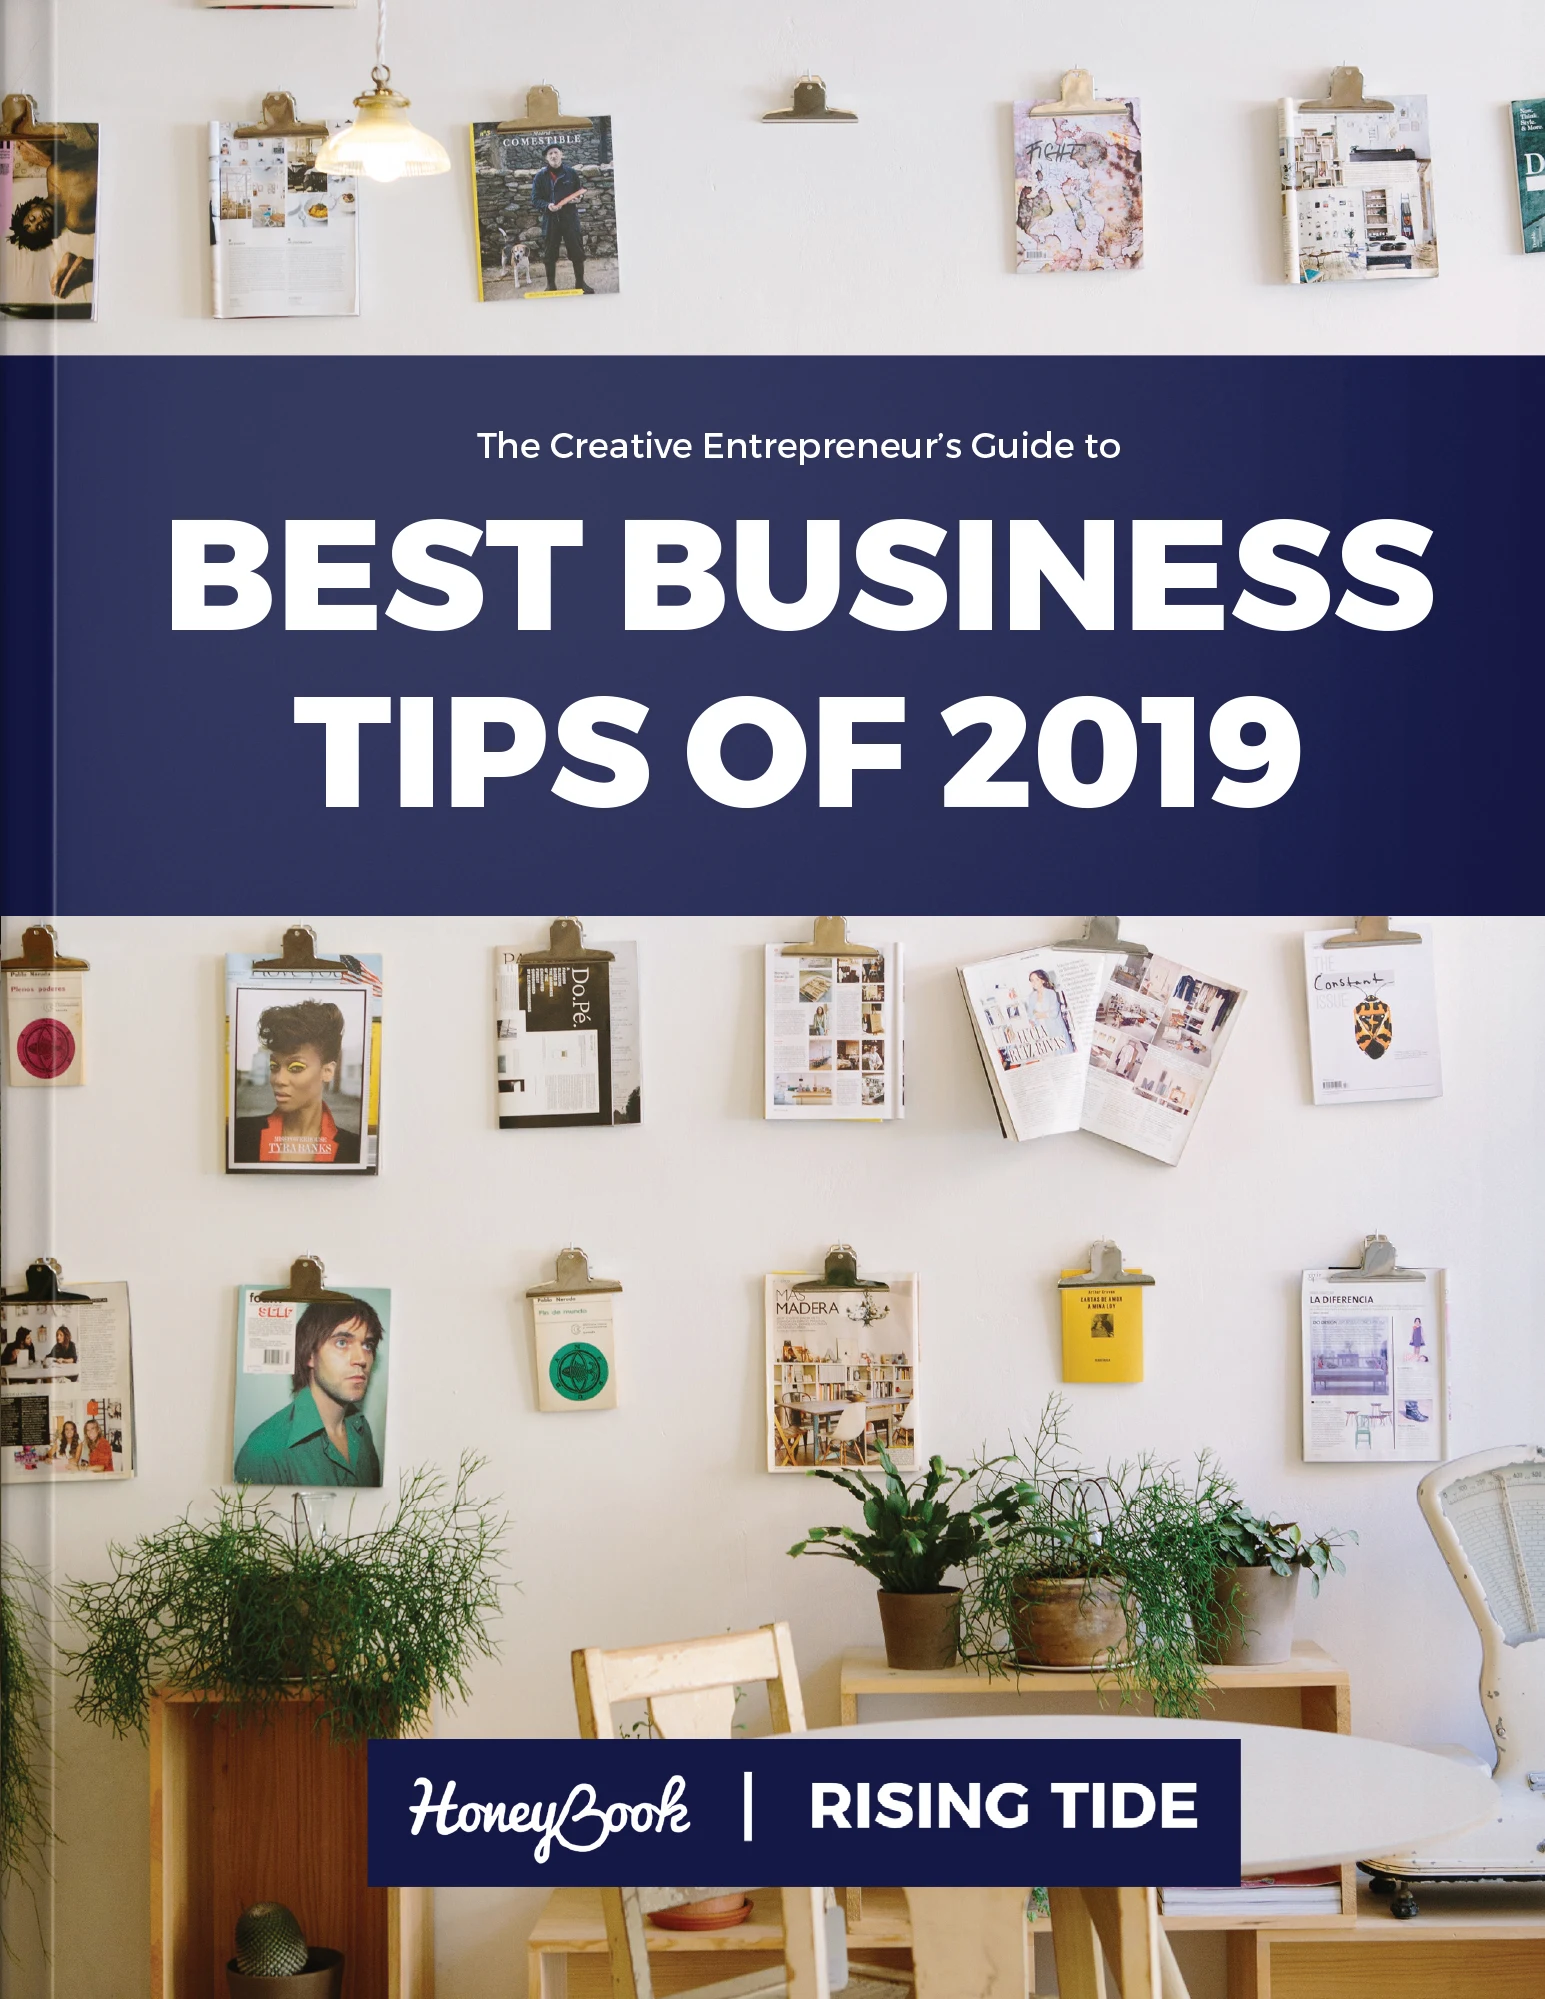 Best Business Tips of 2019